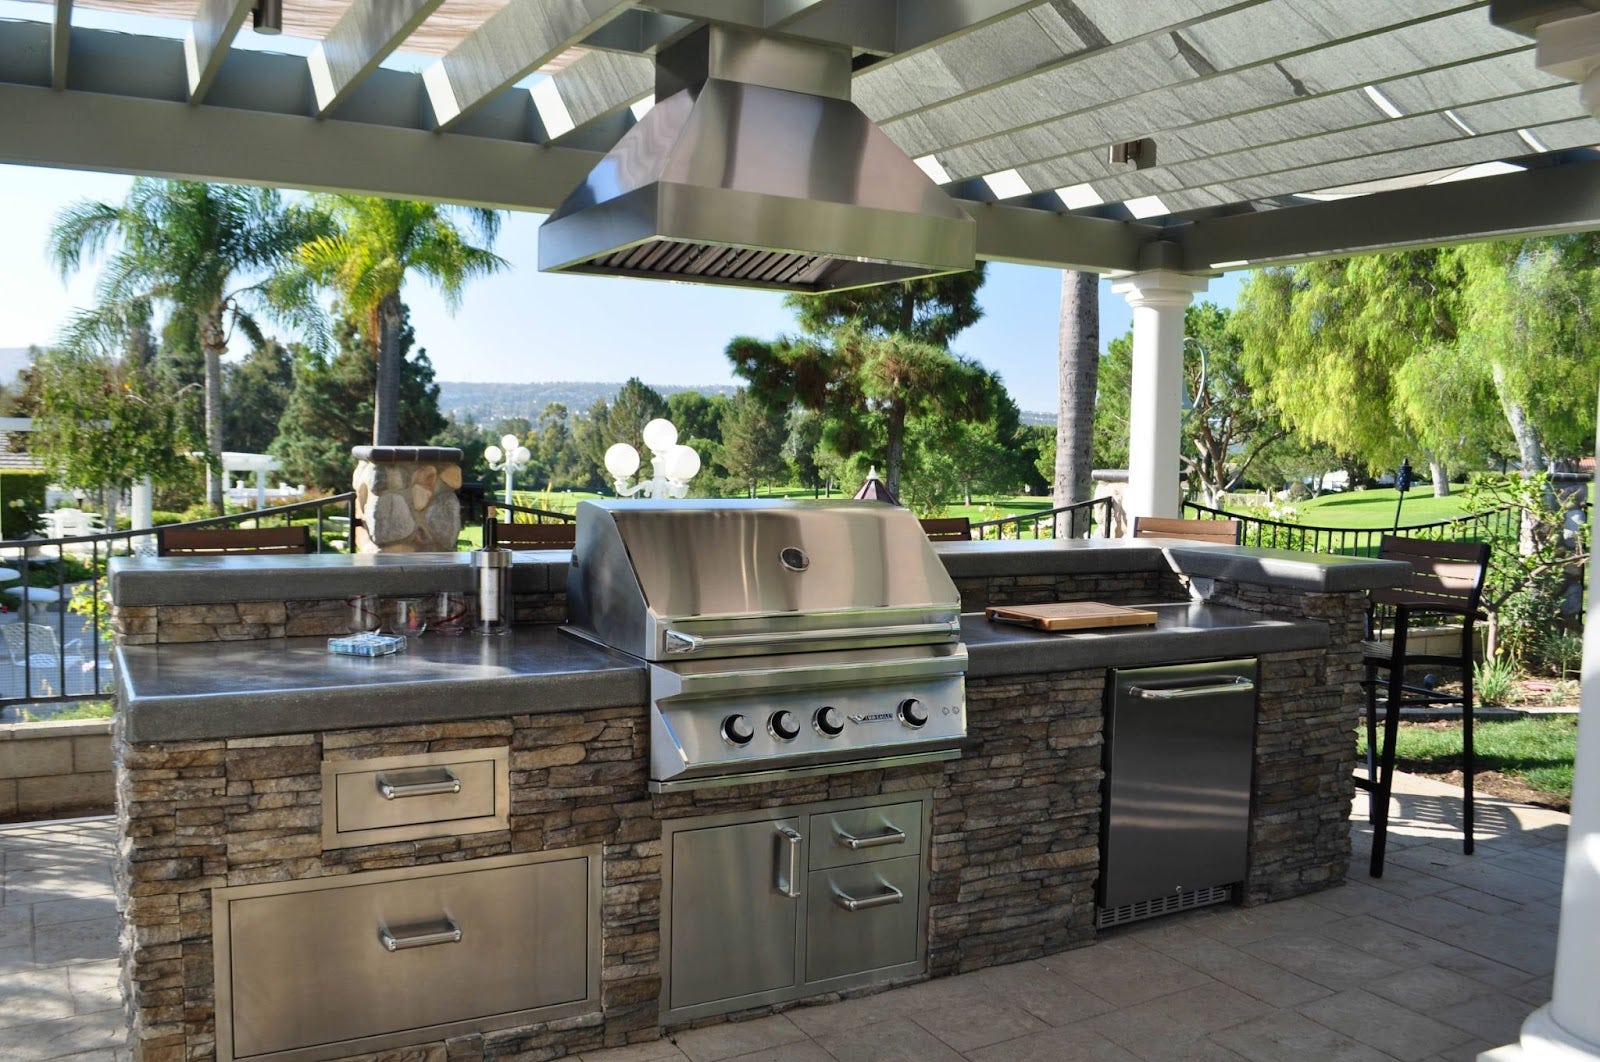 Spacious patio featuring a high-end outdoor kitchen with a built-in grill, stone finishing, and golf course views in the background.